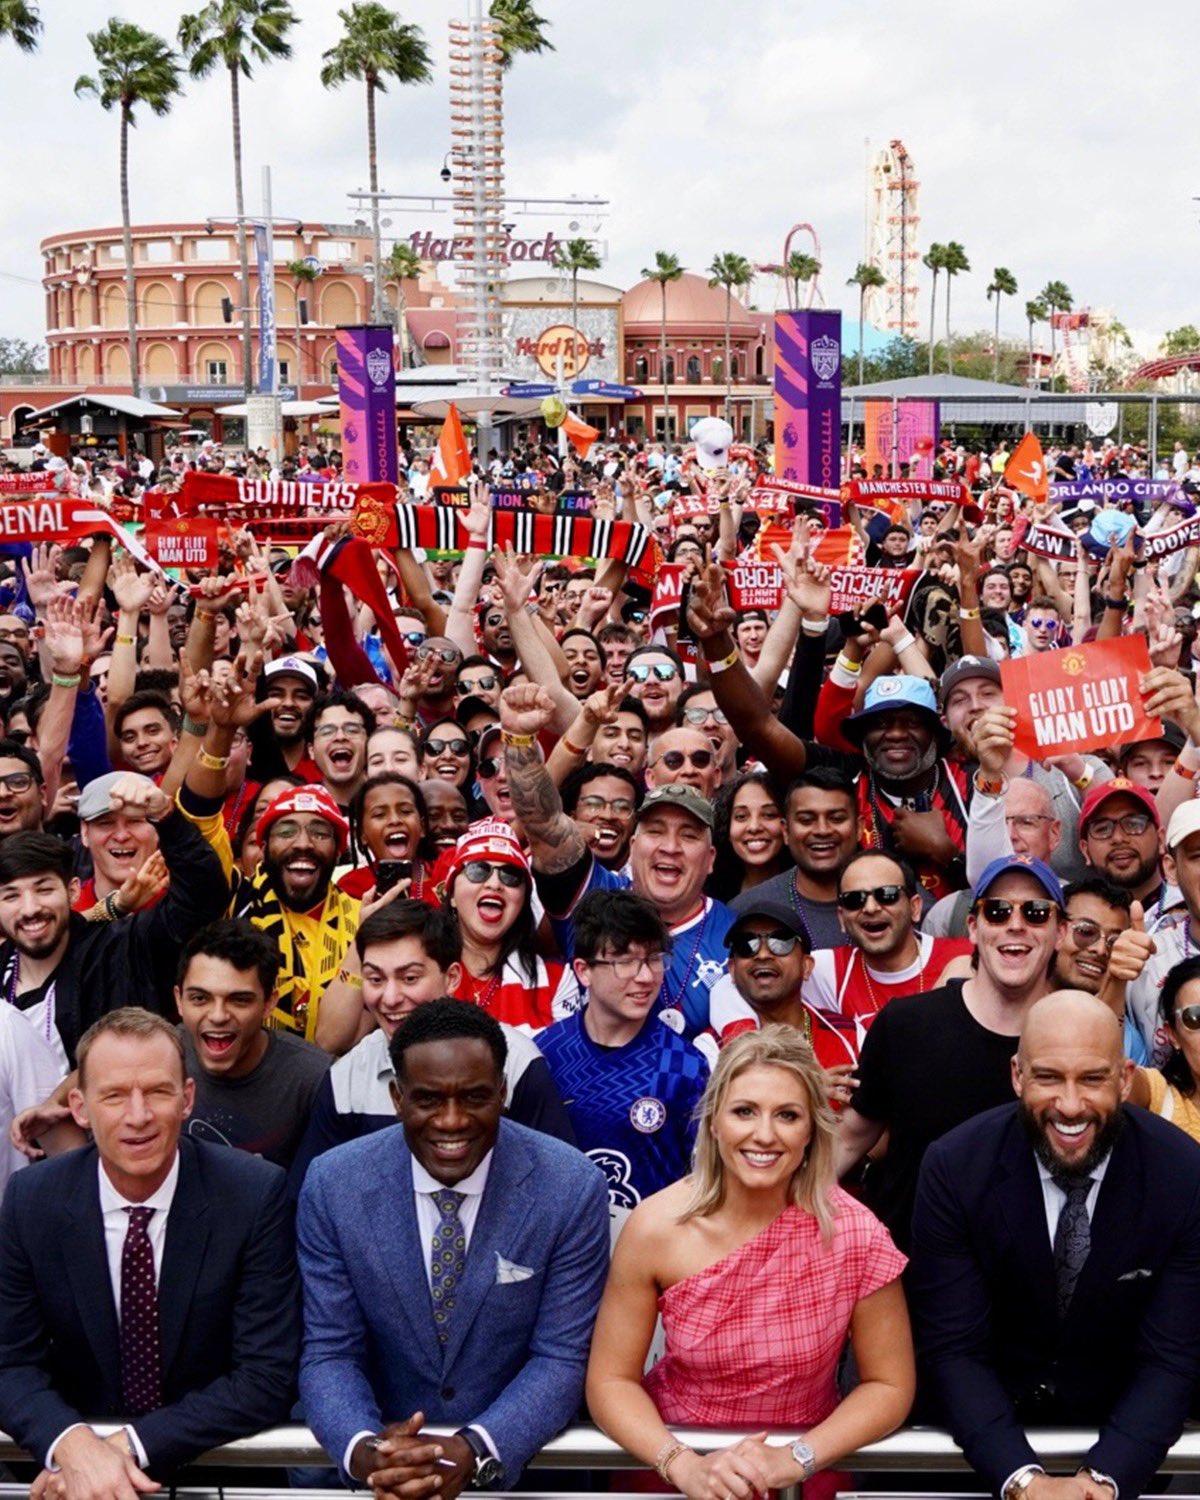 NBC Has Big EPL Weekend with Record Viewership and Fan Fest